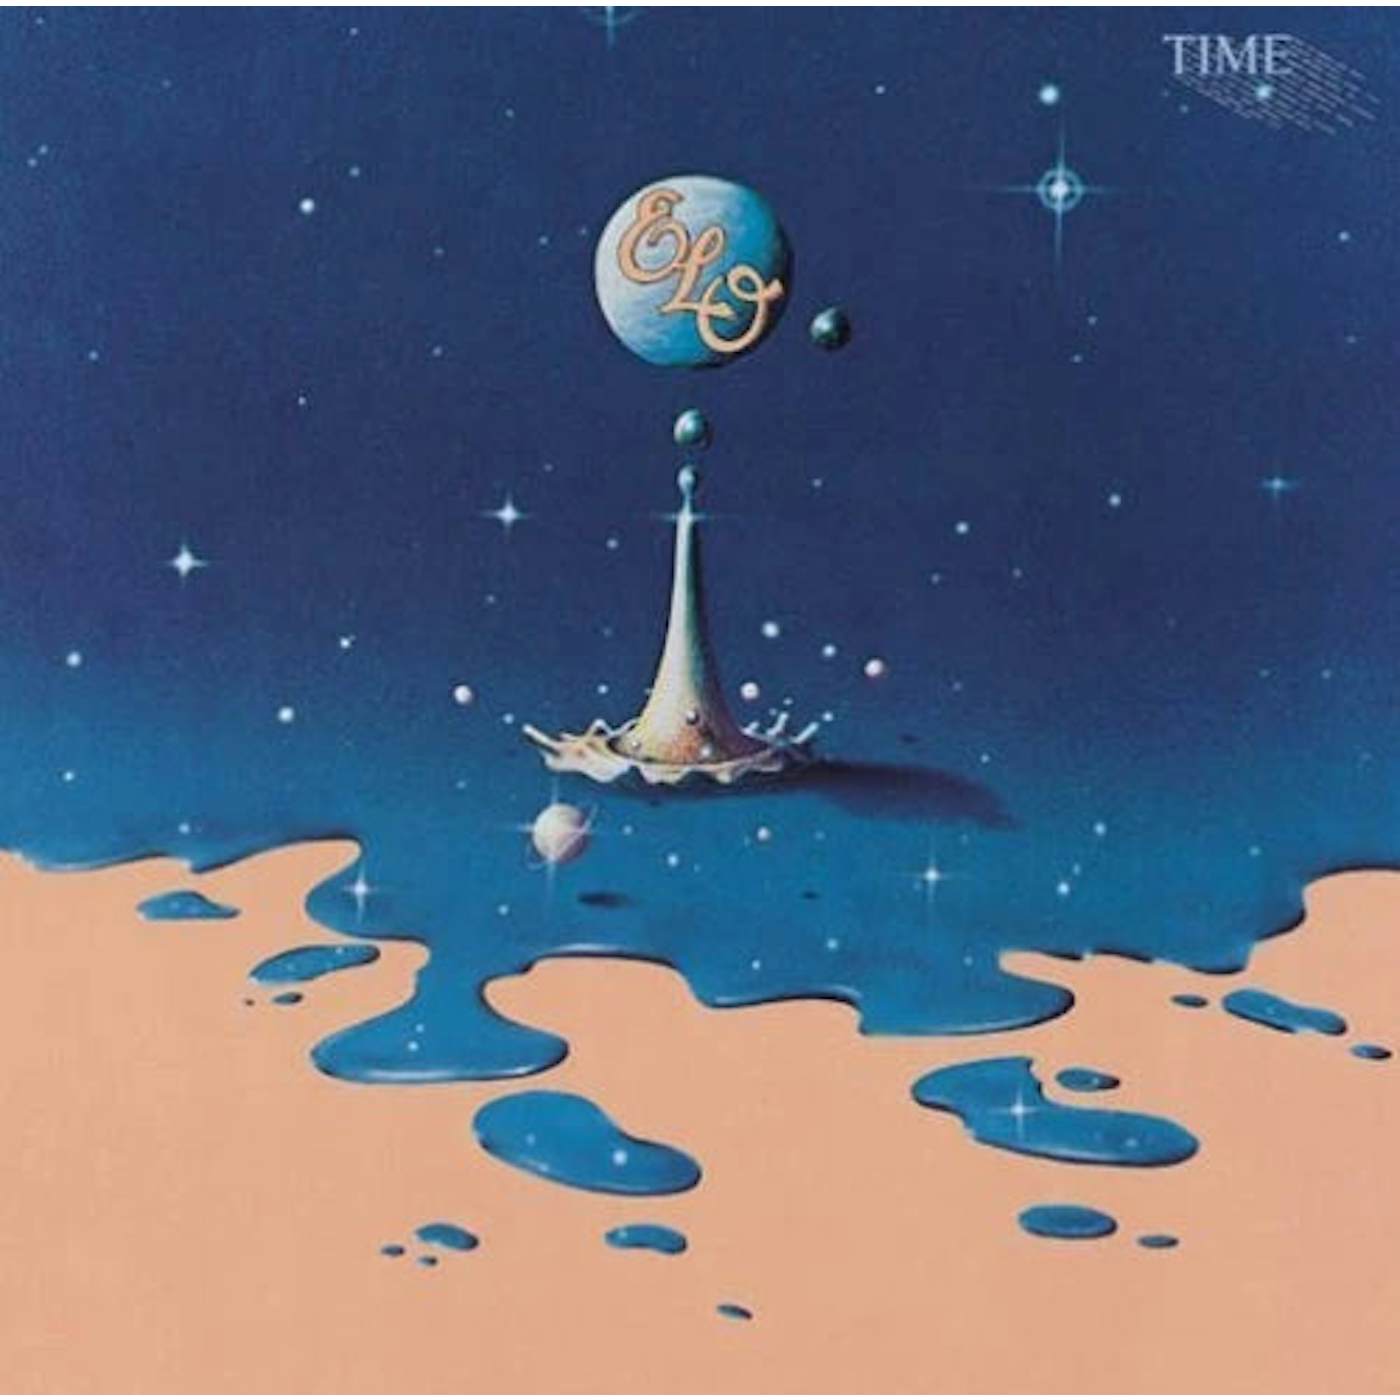 ELO (Electric Light Orchestra) - Time